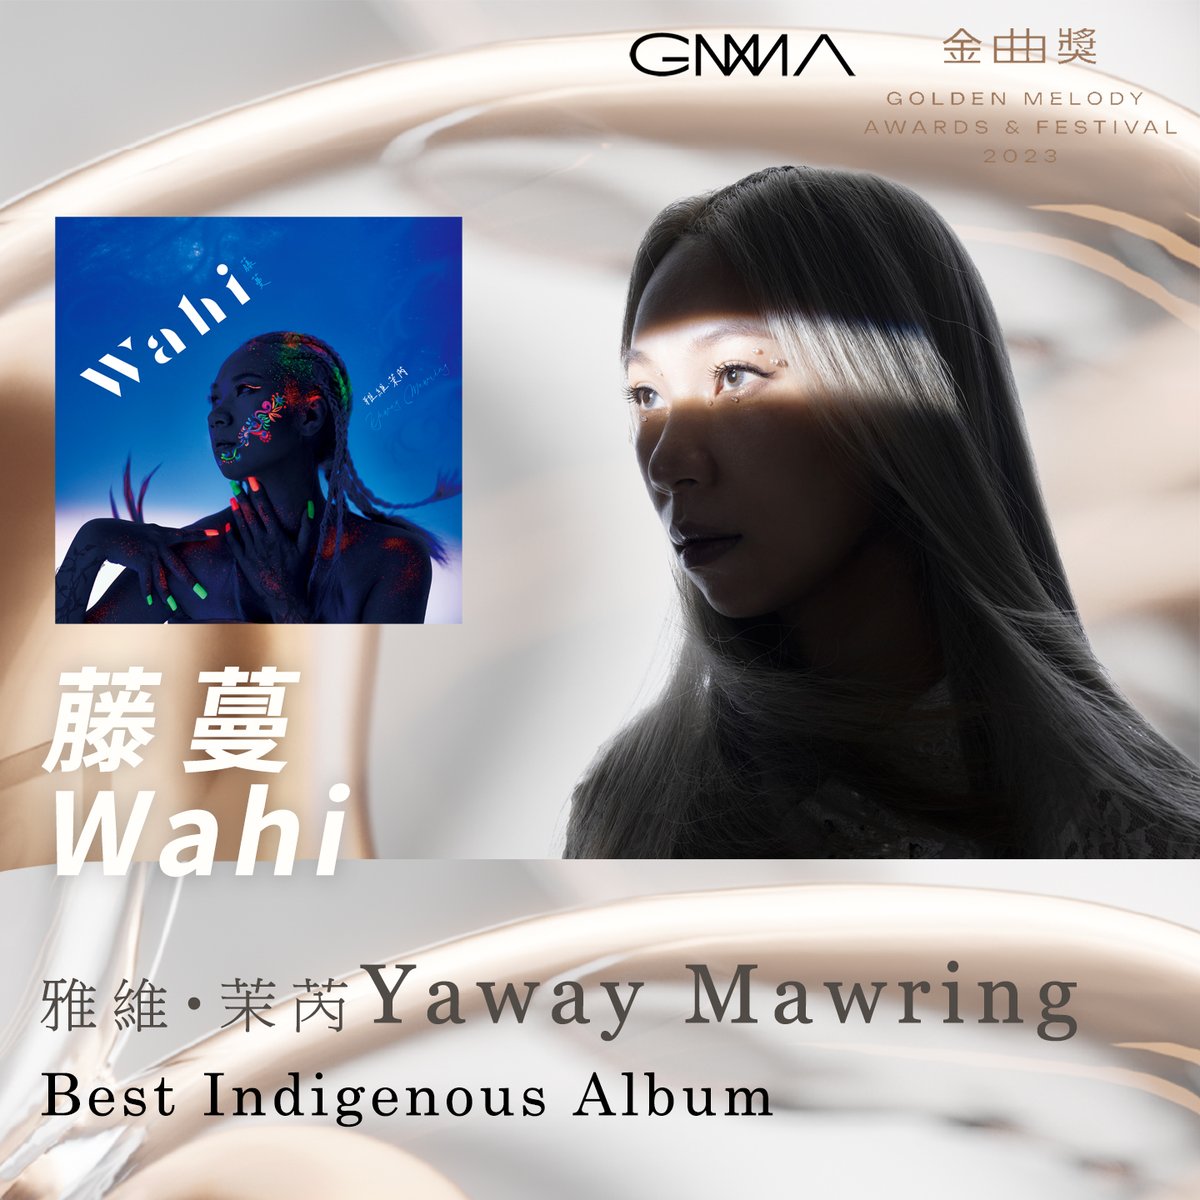 #NewsToYou  ‼Nomination for @GoldenMelody 
🎉 Huge congrats to Yaway Mawring and Biung

🏆Biung / ‘Muskun kata’
🏆Yaway Mawring / 'Wahi'

#WindMusicIntl #GMA #GoldenMelodyAwards #Indigenous #Awards #Design #金曲獎 #34th